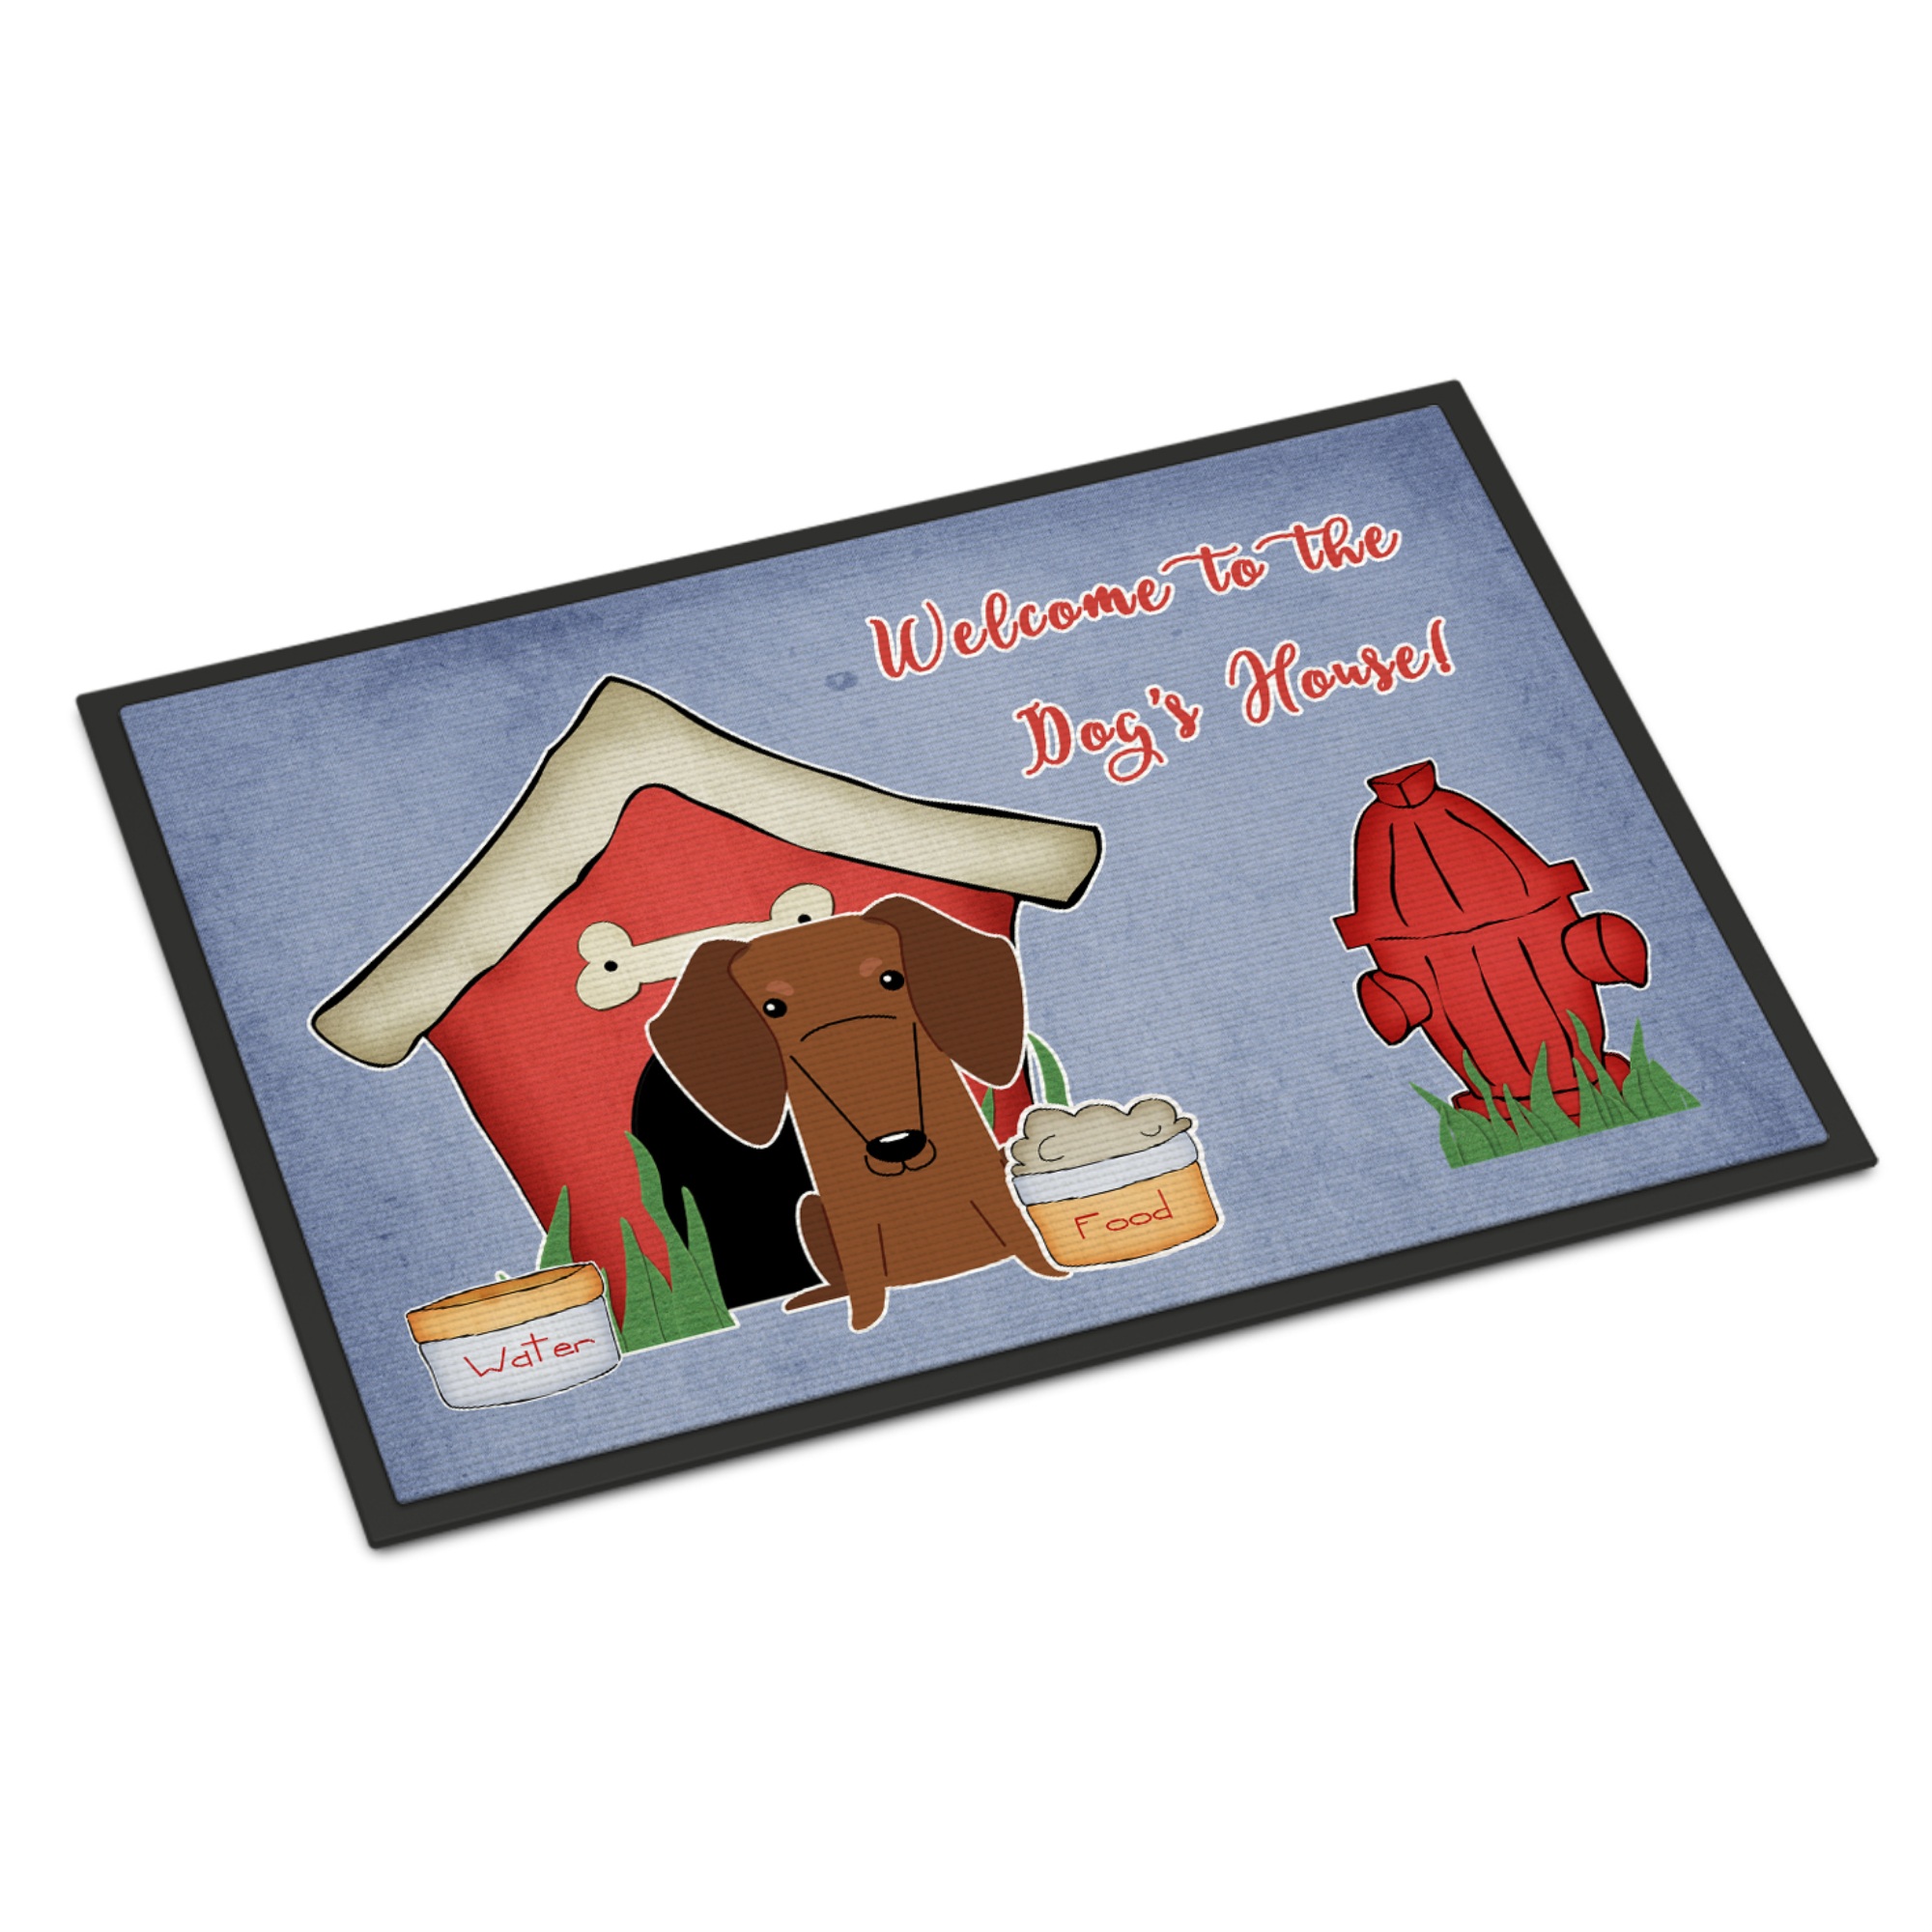 Caroline's Treasures "Caroline's Treasures Dog House Collection Dachshund Red Brown Indoor or Outdoor Mat 24x36 BB2884JMAT 24 x 36"" Multicolor"